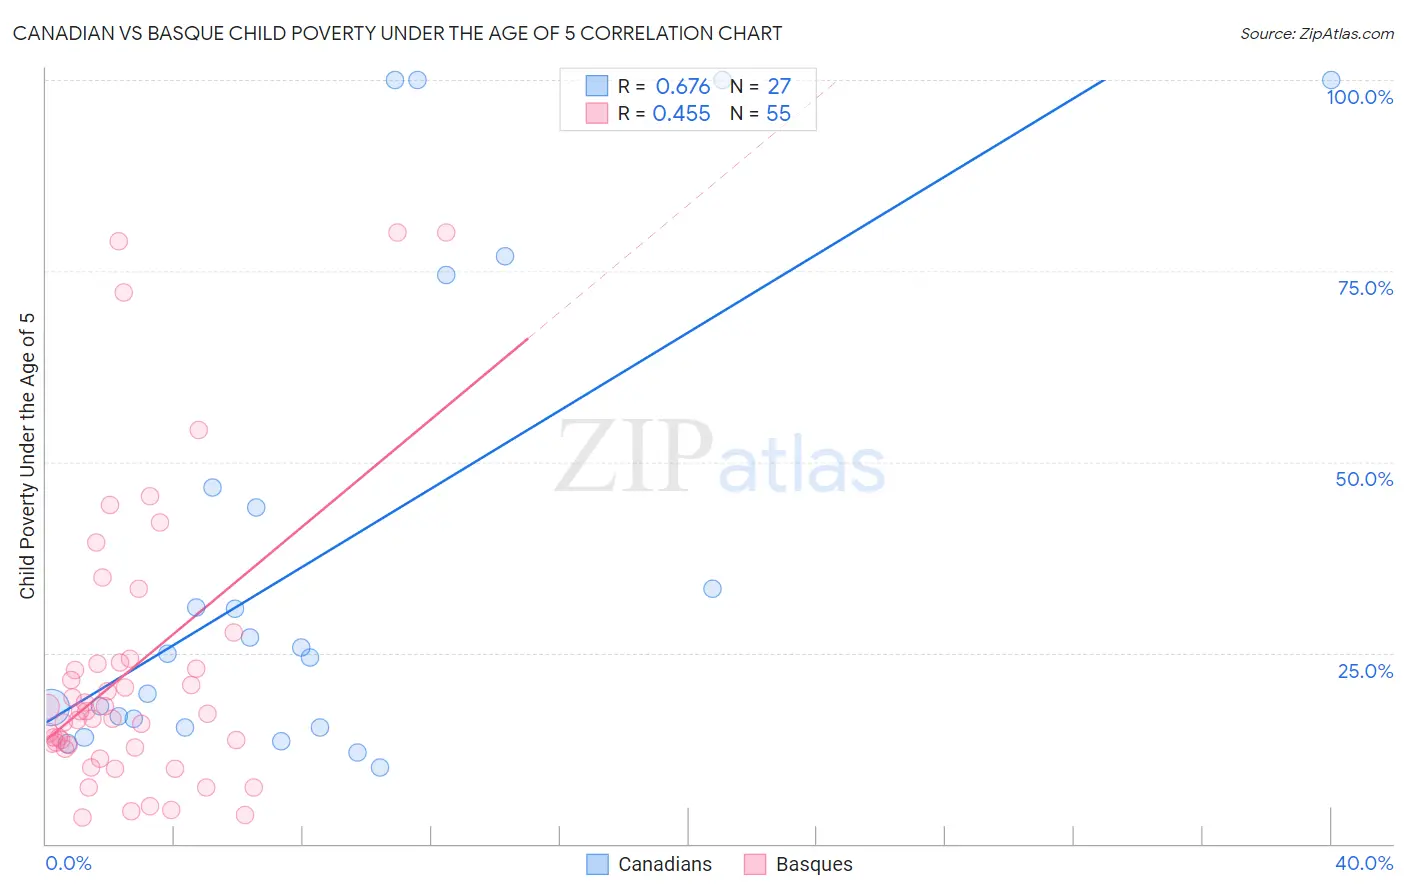 Canadian vs Basque Child Poverty Under the Age of 5